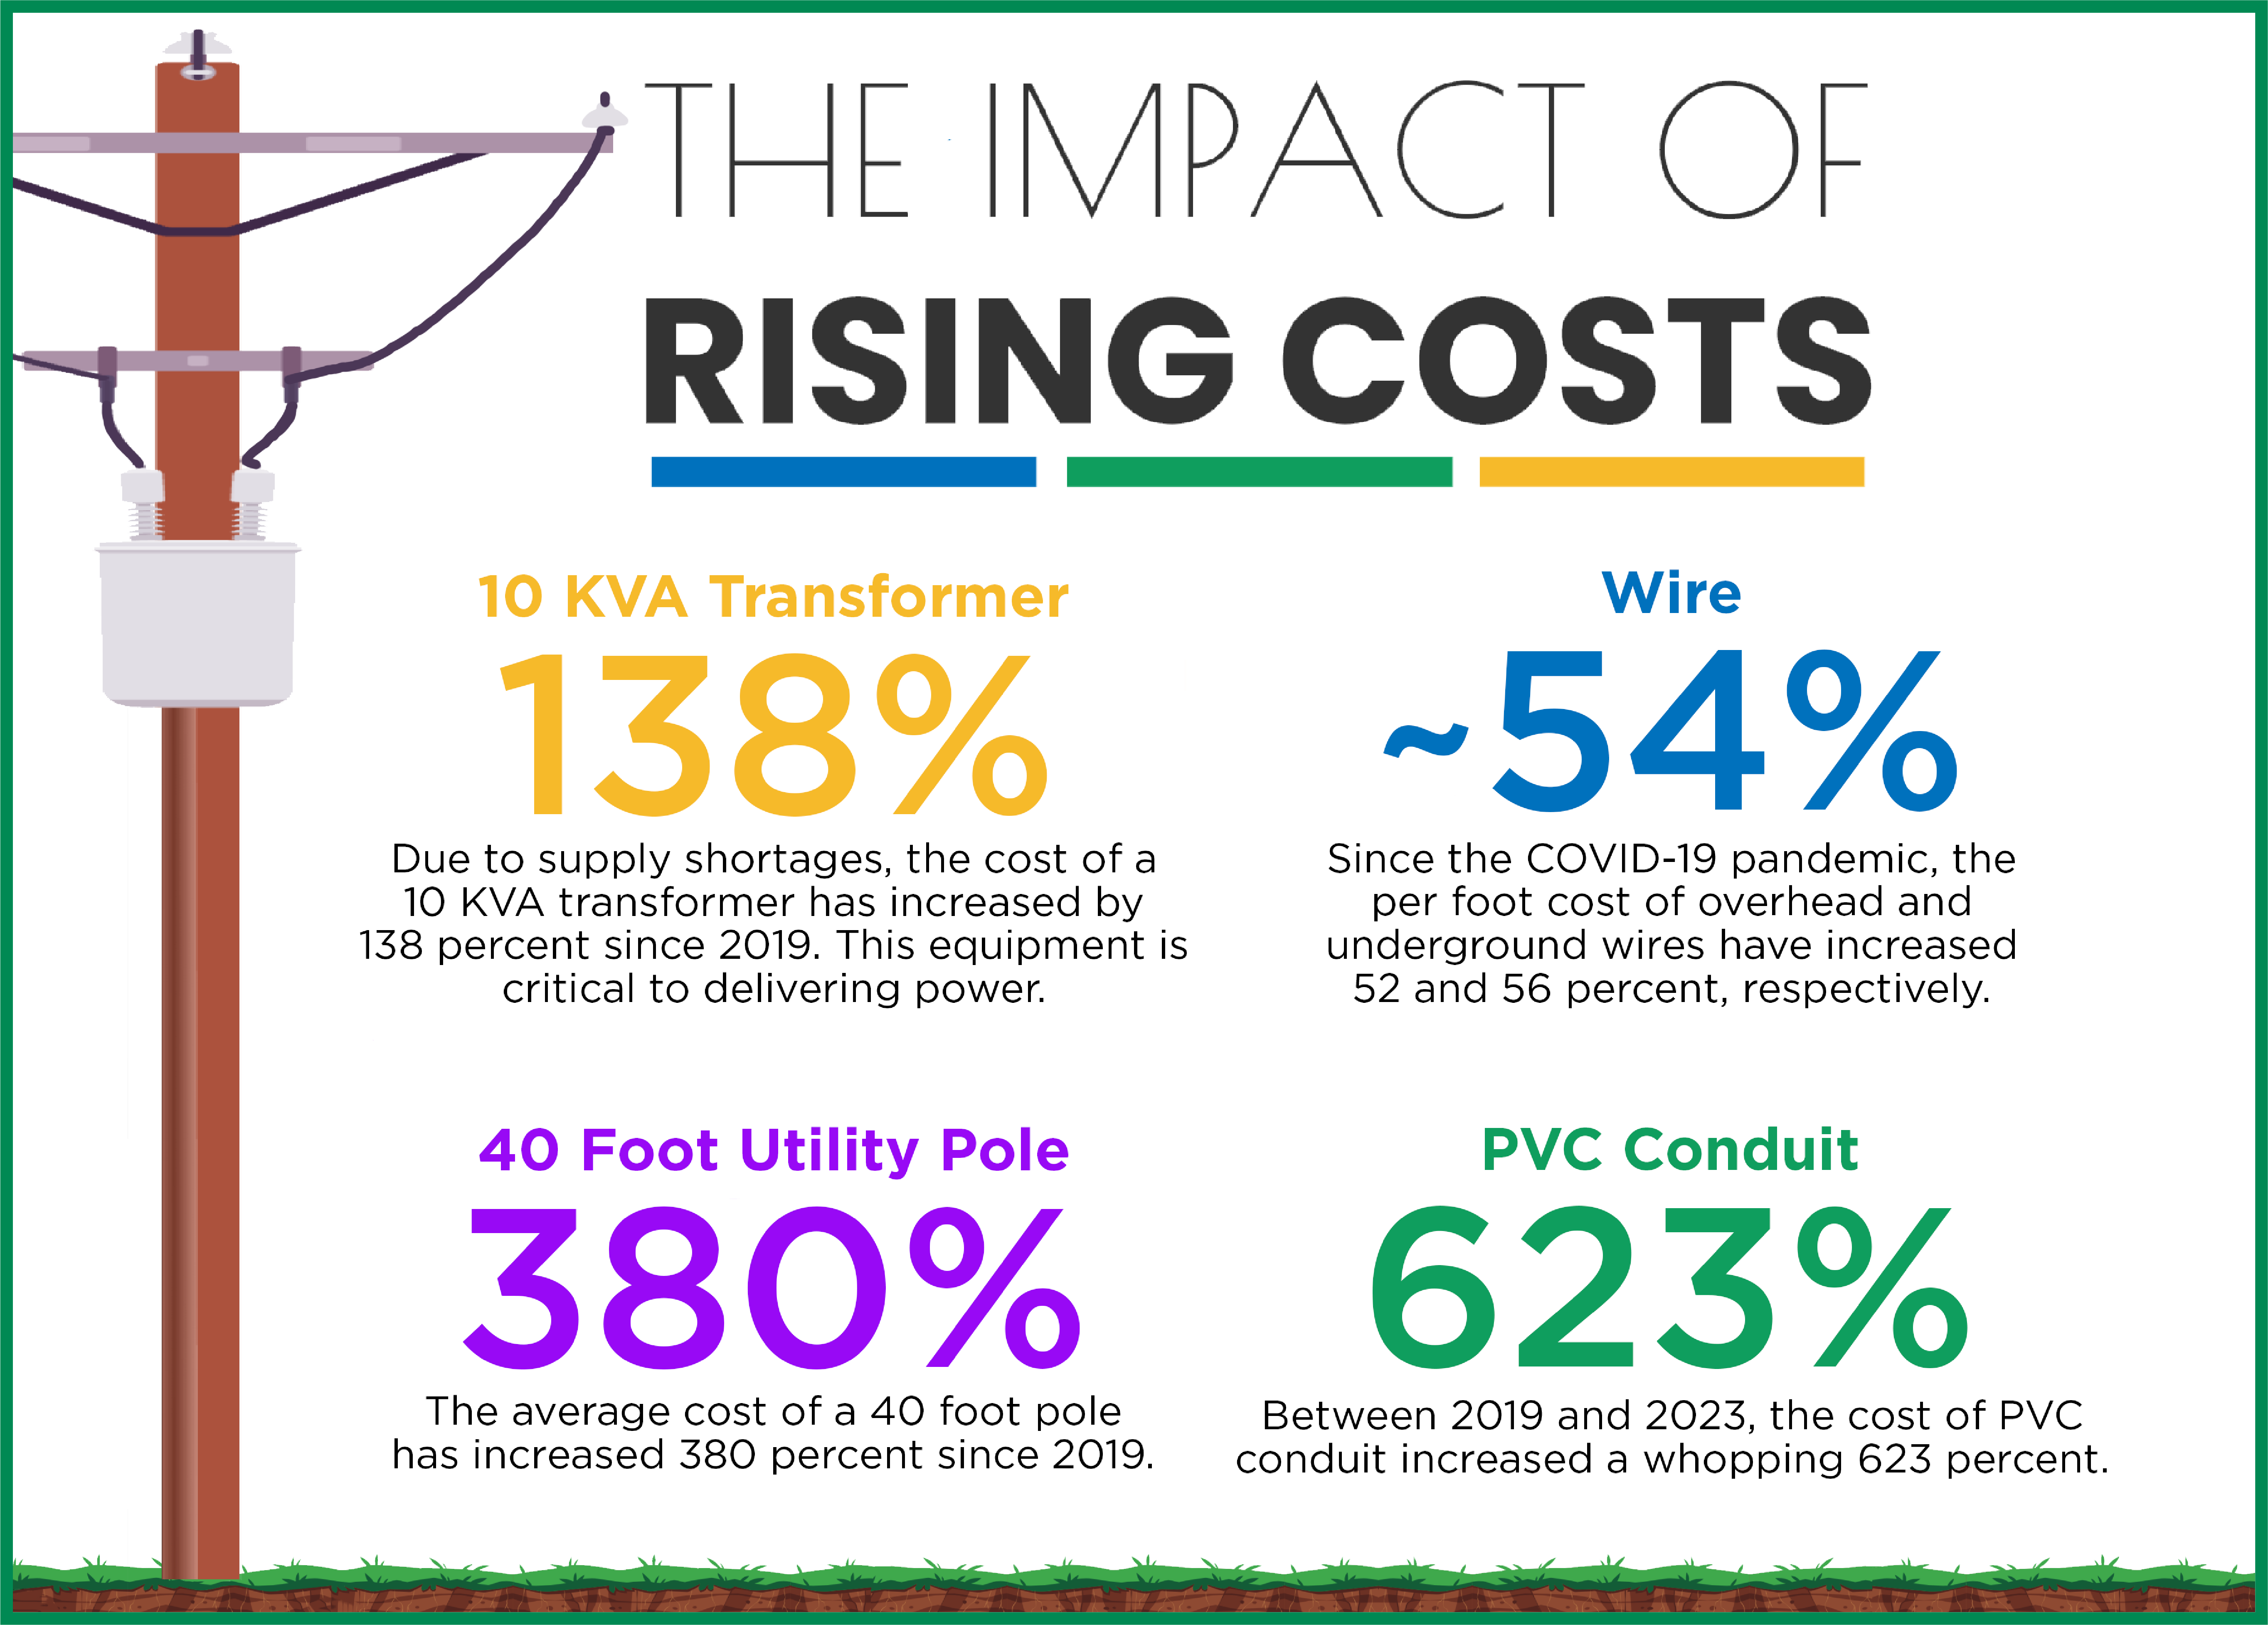 THE IMPACT OF RISING COSTS | Wire: ~54% Since the COVID-19 pandemic, the per foot cost of overhead and underground wires have increased 52 and 56 percent, respectively. 10 KVA Transformer: 138% Due to supply shortages, the cost of a 10 KVA transformer has increased by 138 percent since 2019. This equipment is critical to delivering power. 40 Food Utility Pole: 380% The average cost of a 40 foot pole has increased 380 percent since 2019. PVC Conduit: 623% Between 2019 and 2023, the cost of PVC conduit increased a whopping 623 percent.